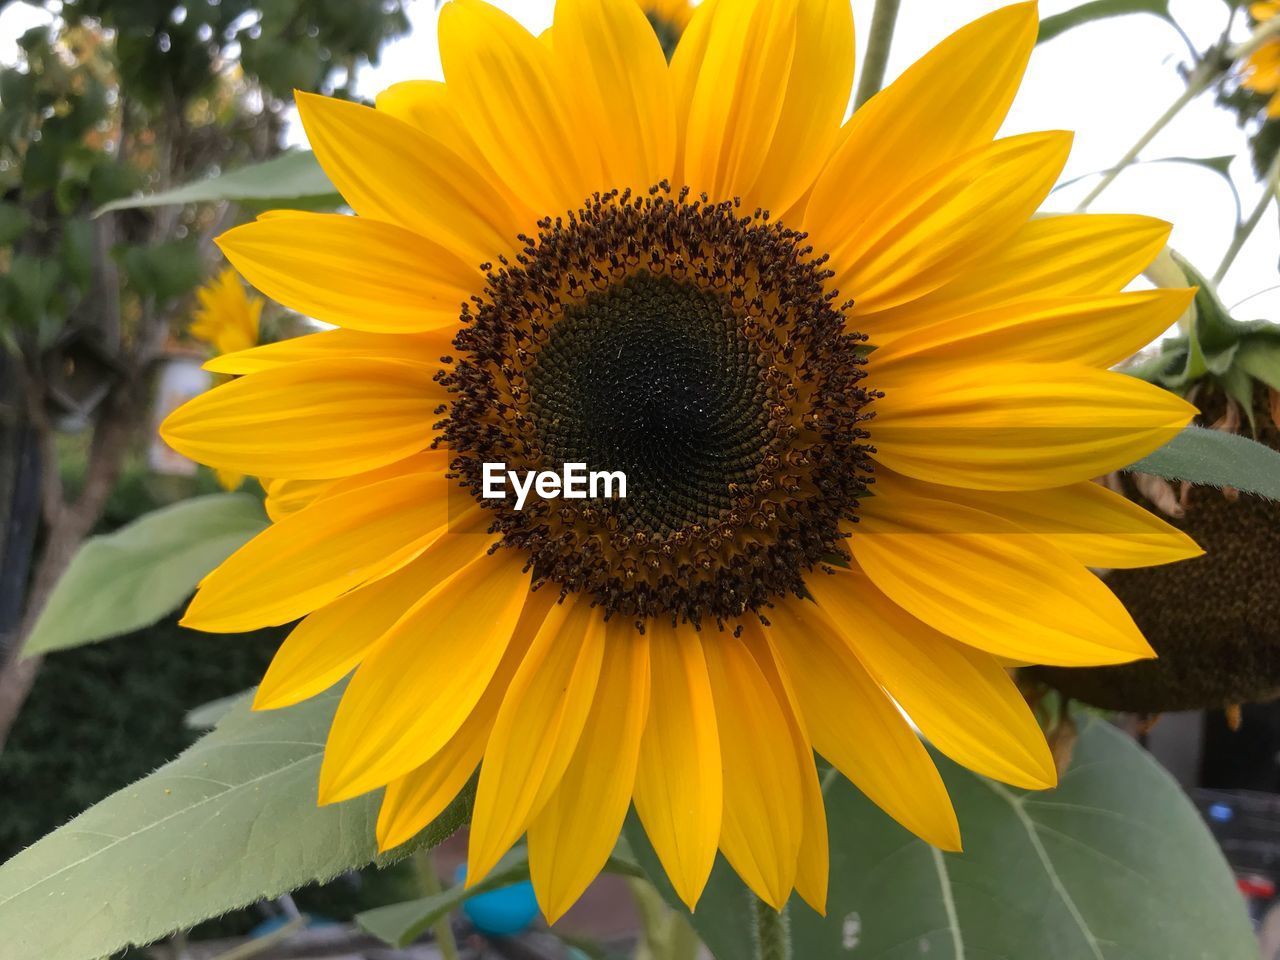 CLOSE-UP OF SUNFLOWER IN BLOOM OF YELLOW FLOWER